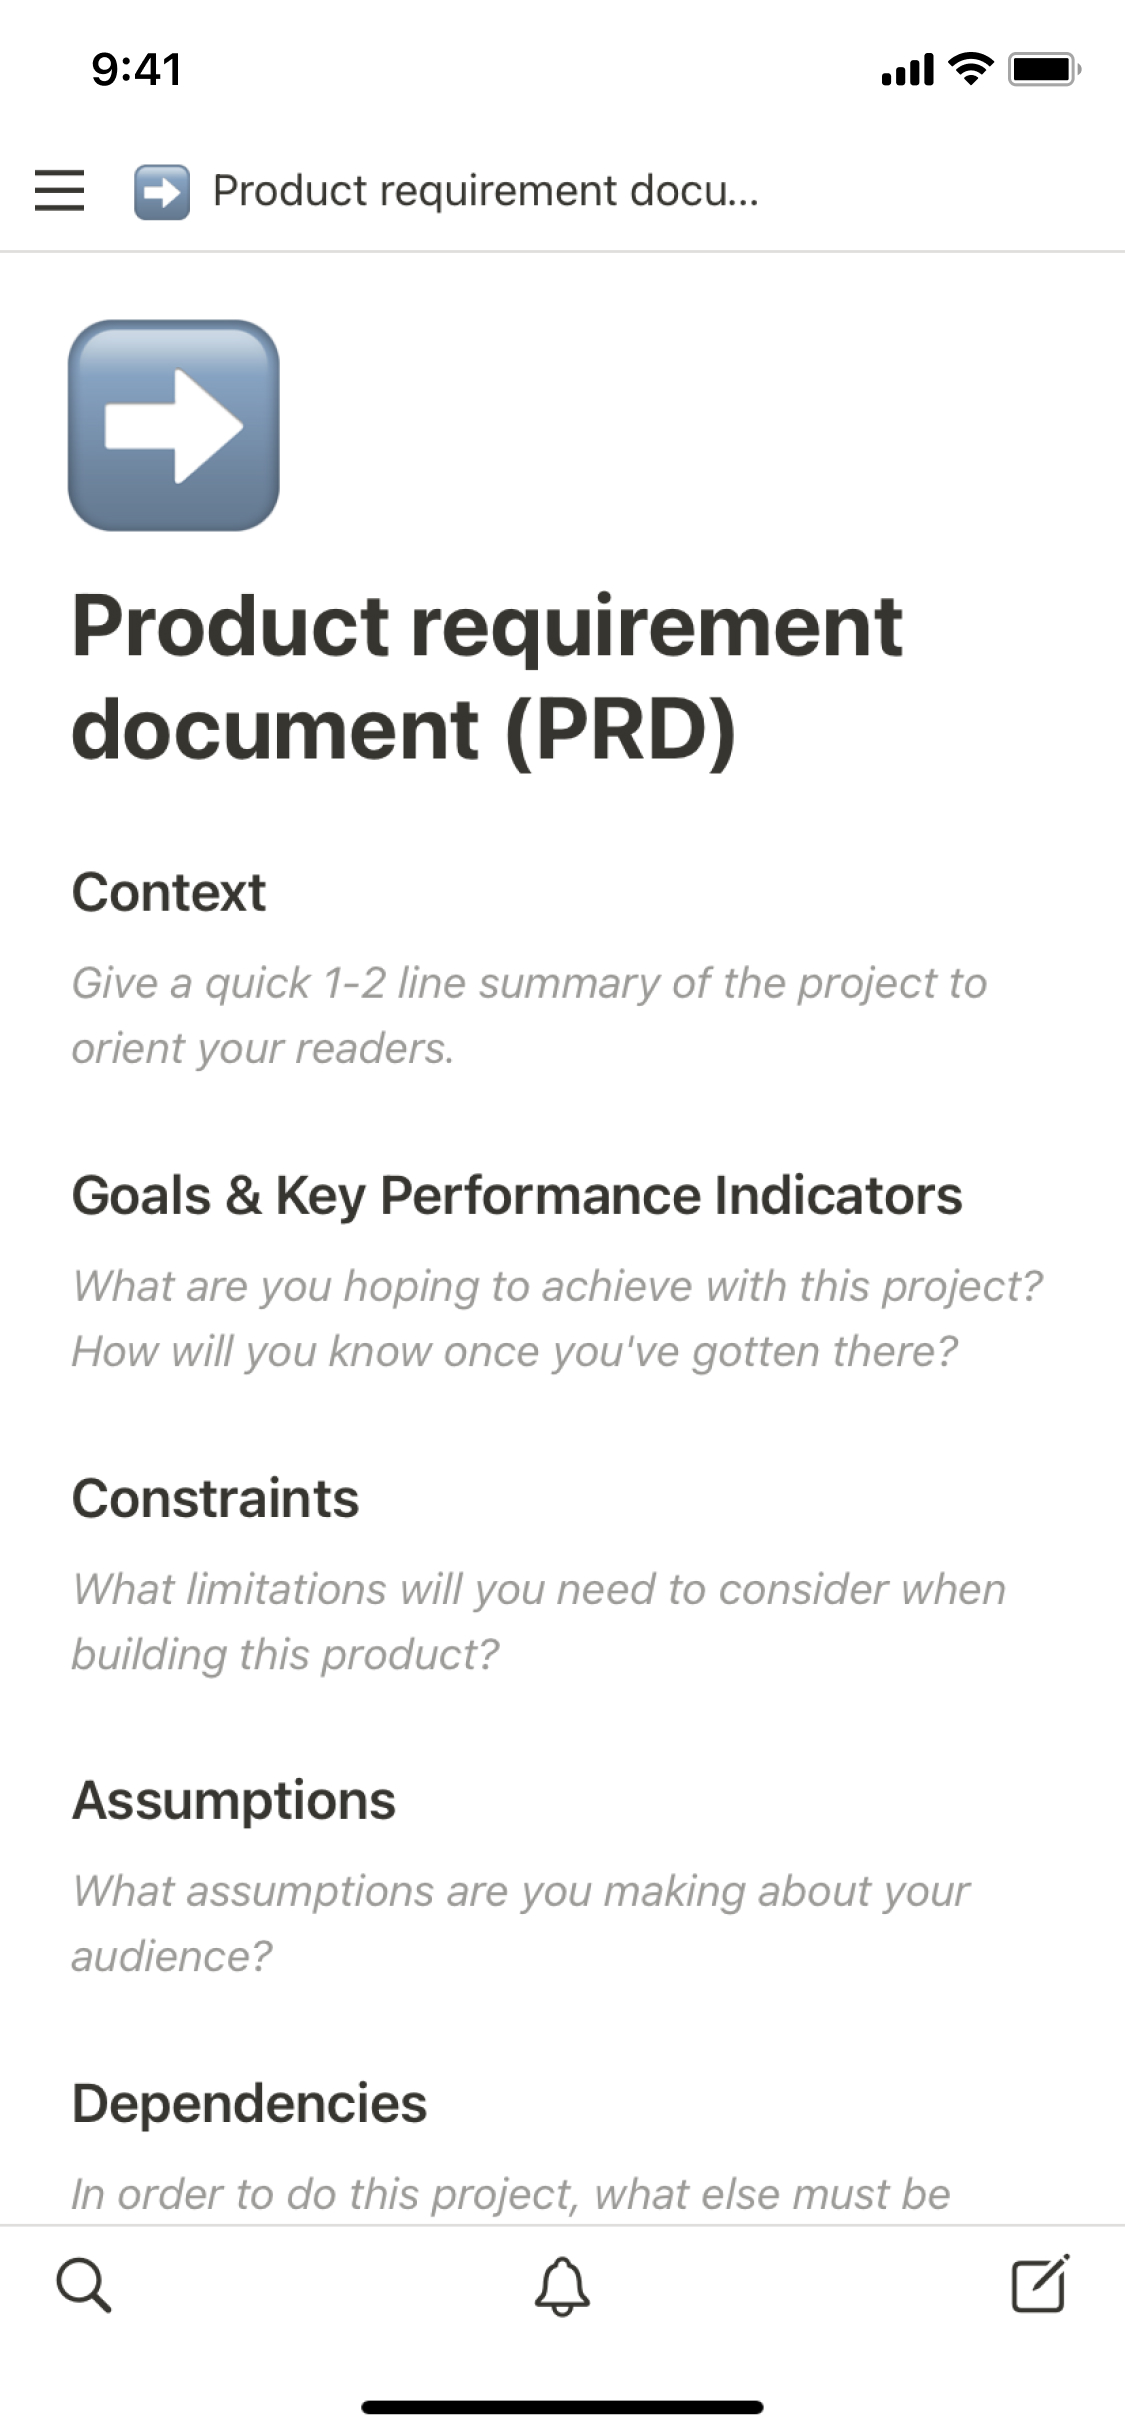 The mobile image for the Product requirement document (PRD) template